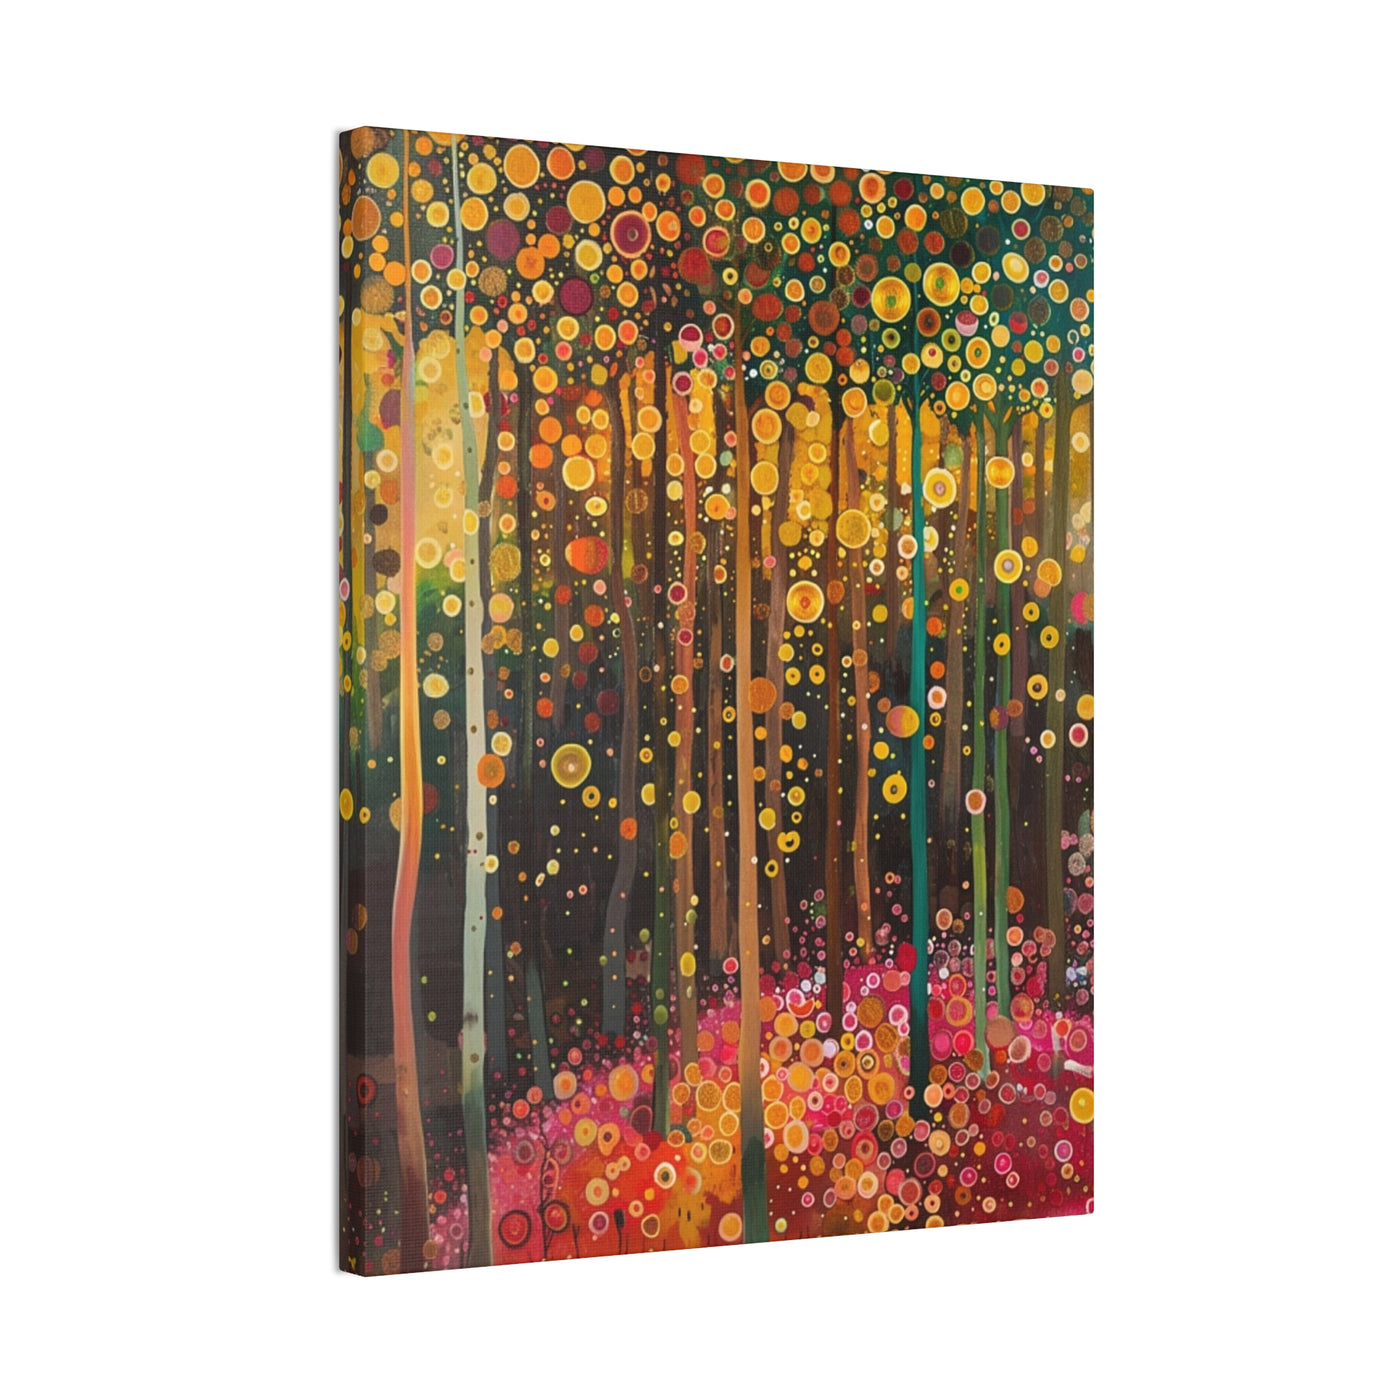 Product image showing canvas wall art of Glowing Grove - Summertime Forest and Sunbeams sideview